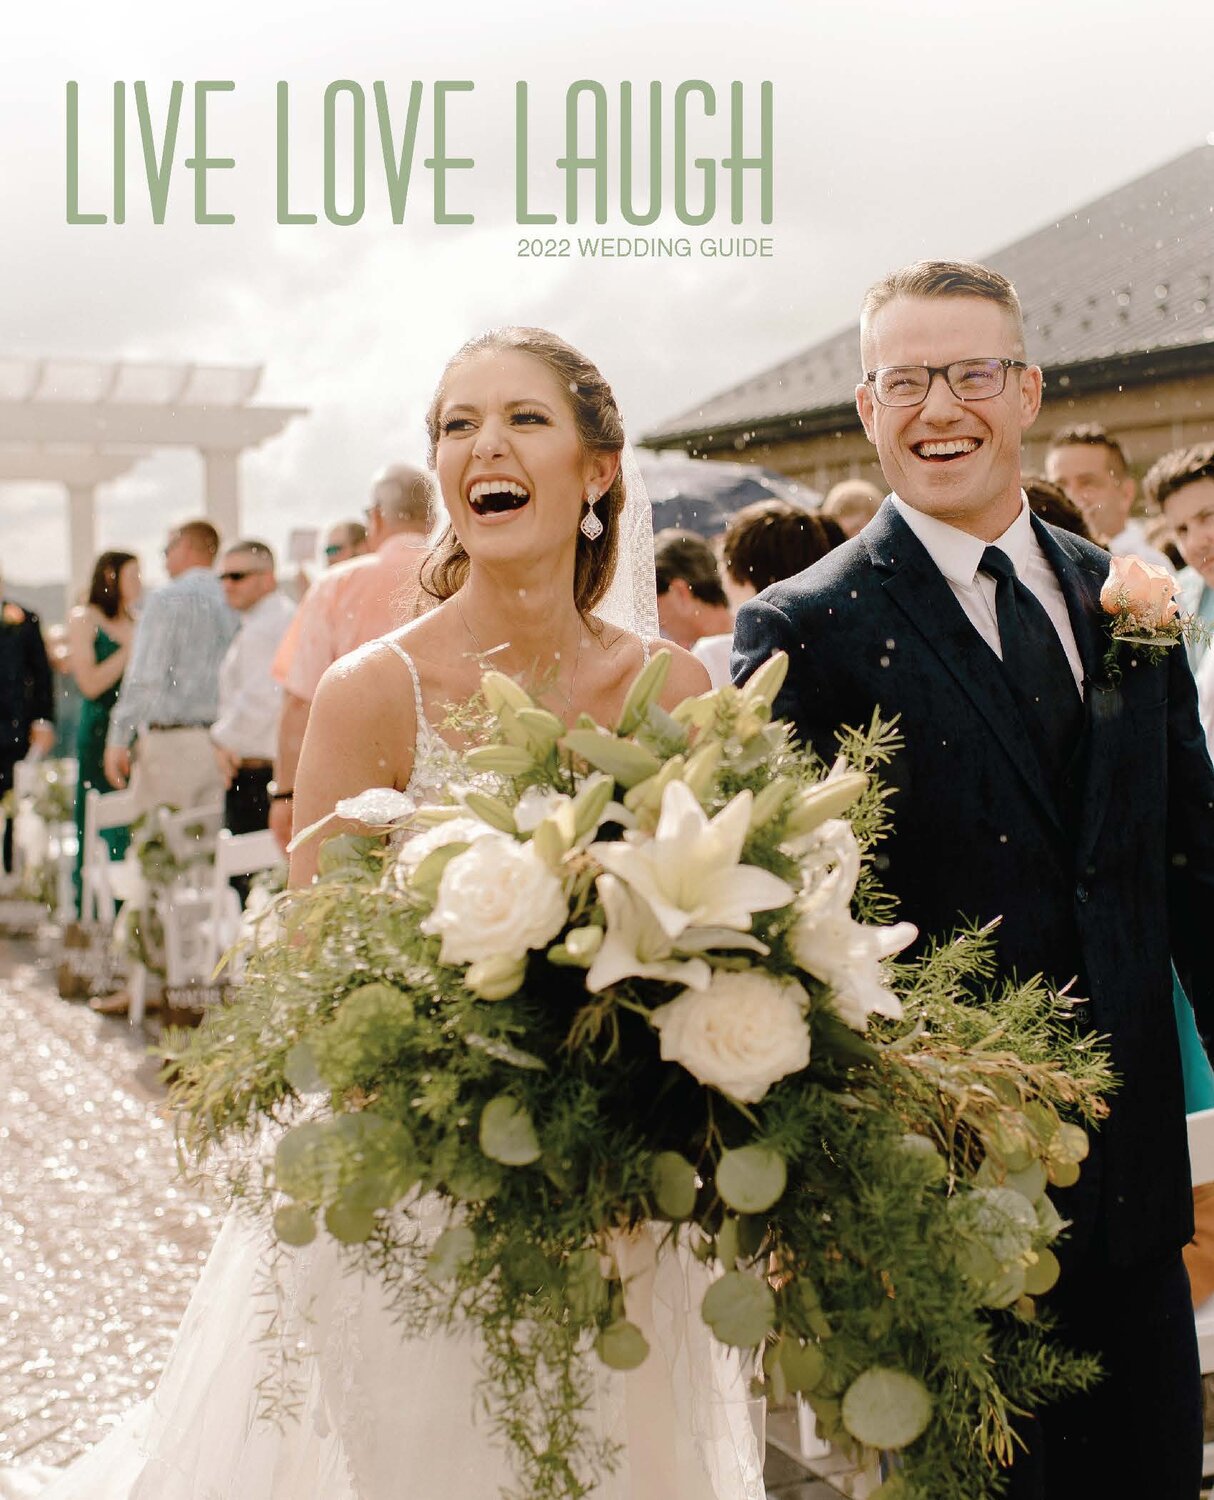 The photo contest for the cover of the Live Love Laugh Wedding Guide is open.